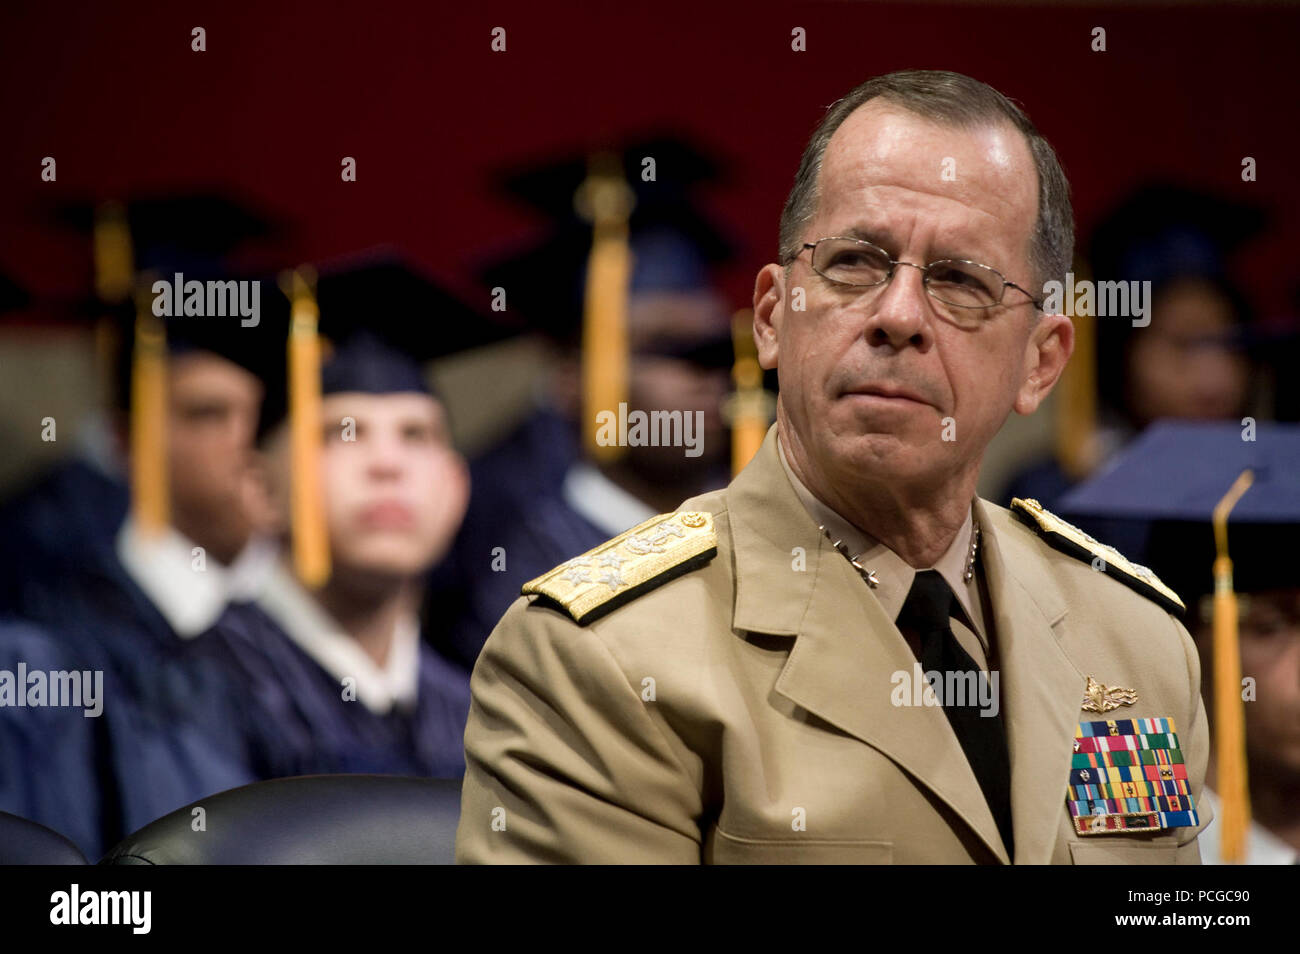 U.S. Navy Adm. Mike Mullen, chairman of the Joint Chiefs of Staff, addresses graduates of the New Jersey National Guard Youth Challenge Academy at their graduation in Trenton, N.J., August 29, 2009. The program identifies New Jersey youth who have dropped out of high school and using military style training aim to enhance the life skills and employment potential ( Stock Photo